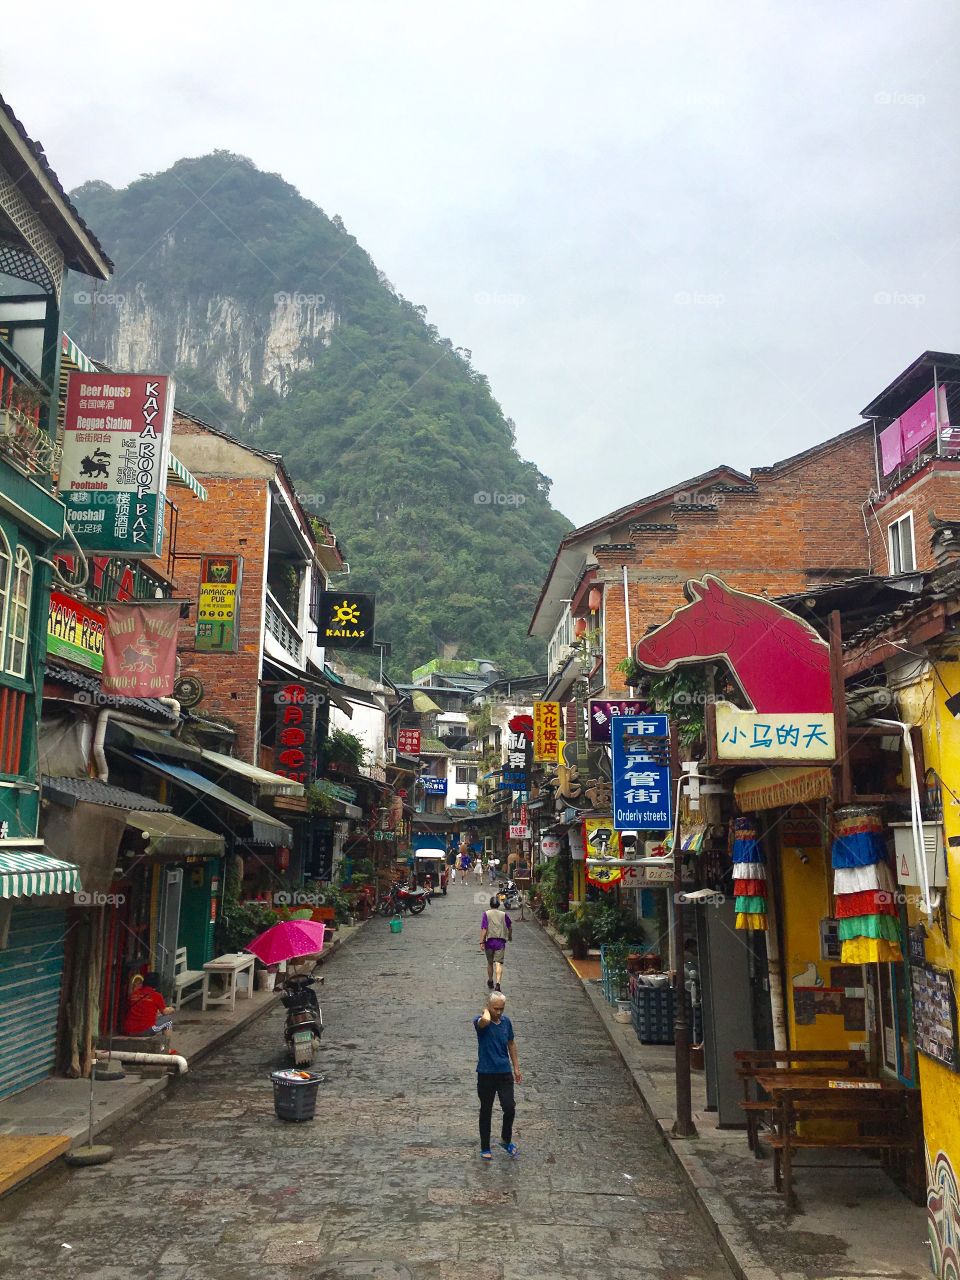 This is Yangshuo, once described in the Lonely Planet guidebook as a "backpacker's laid-back Mecca".